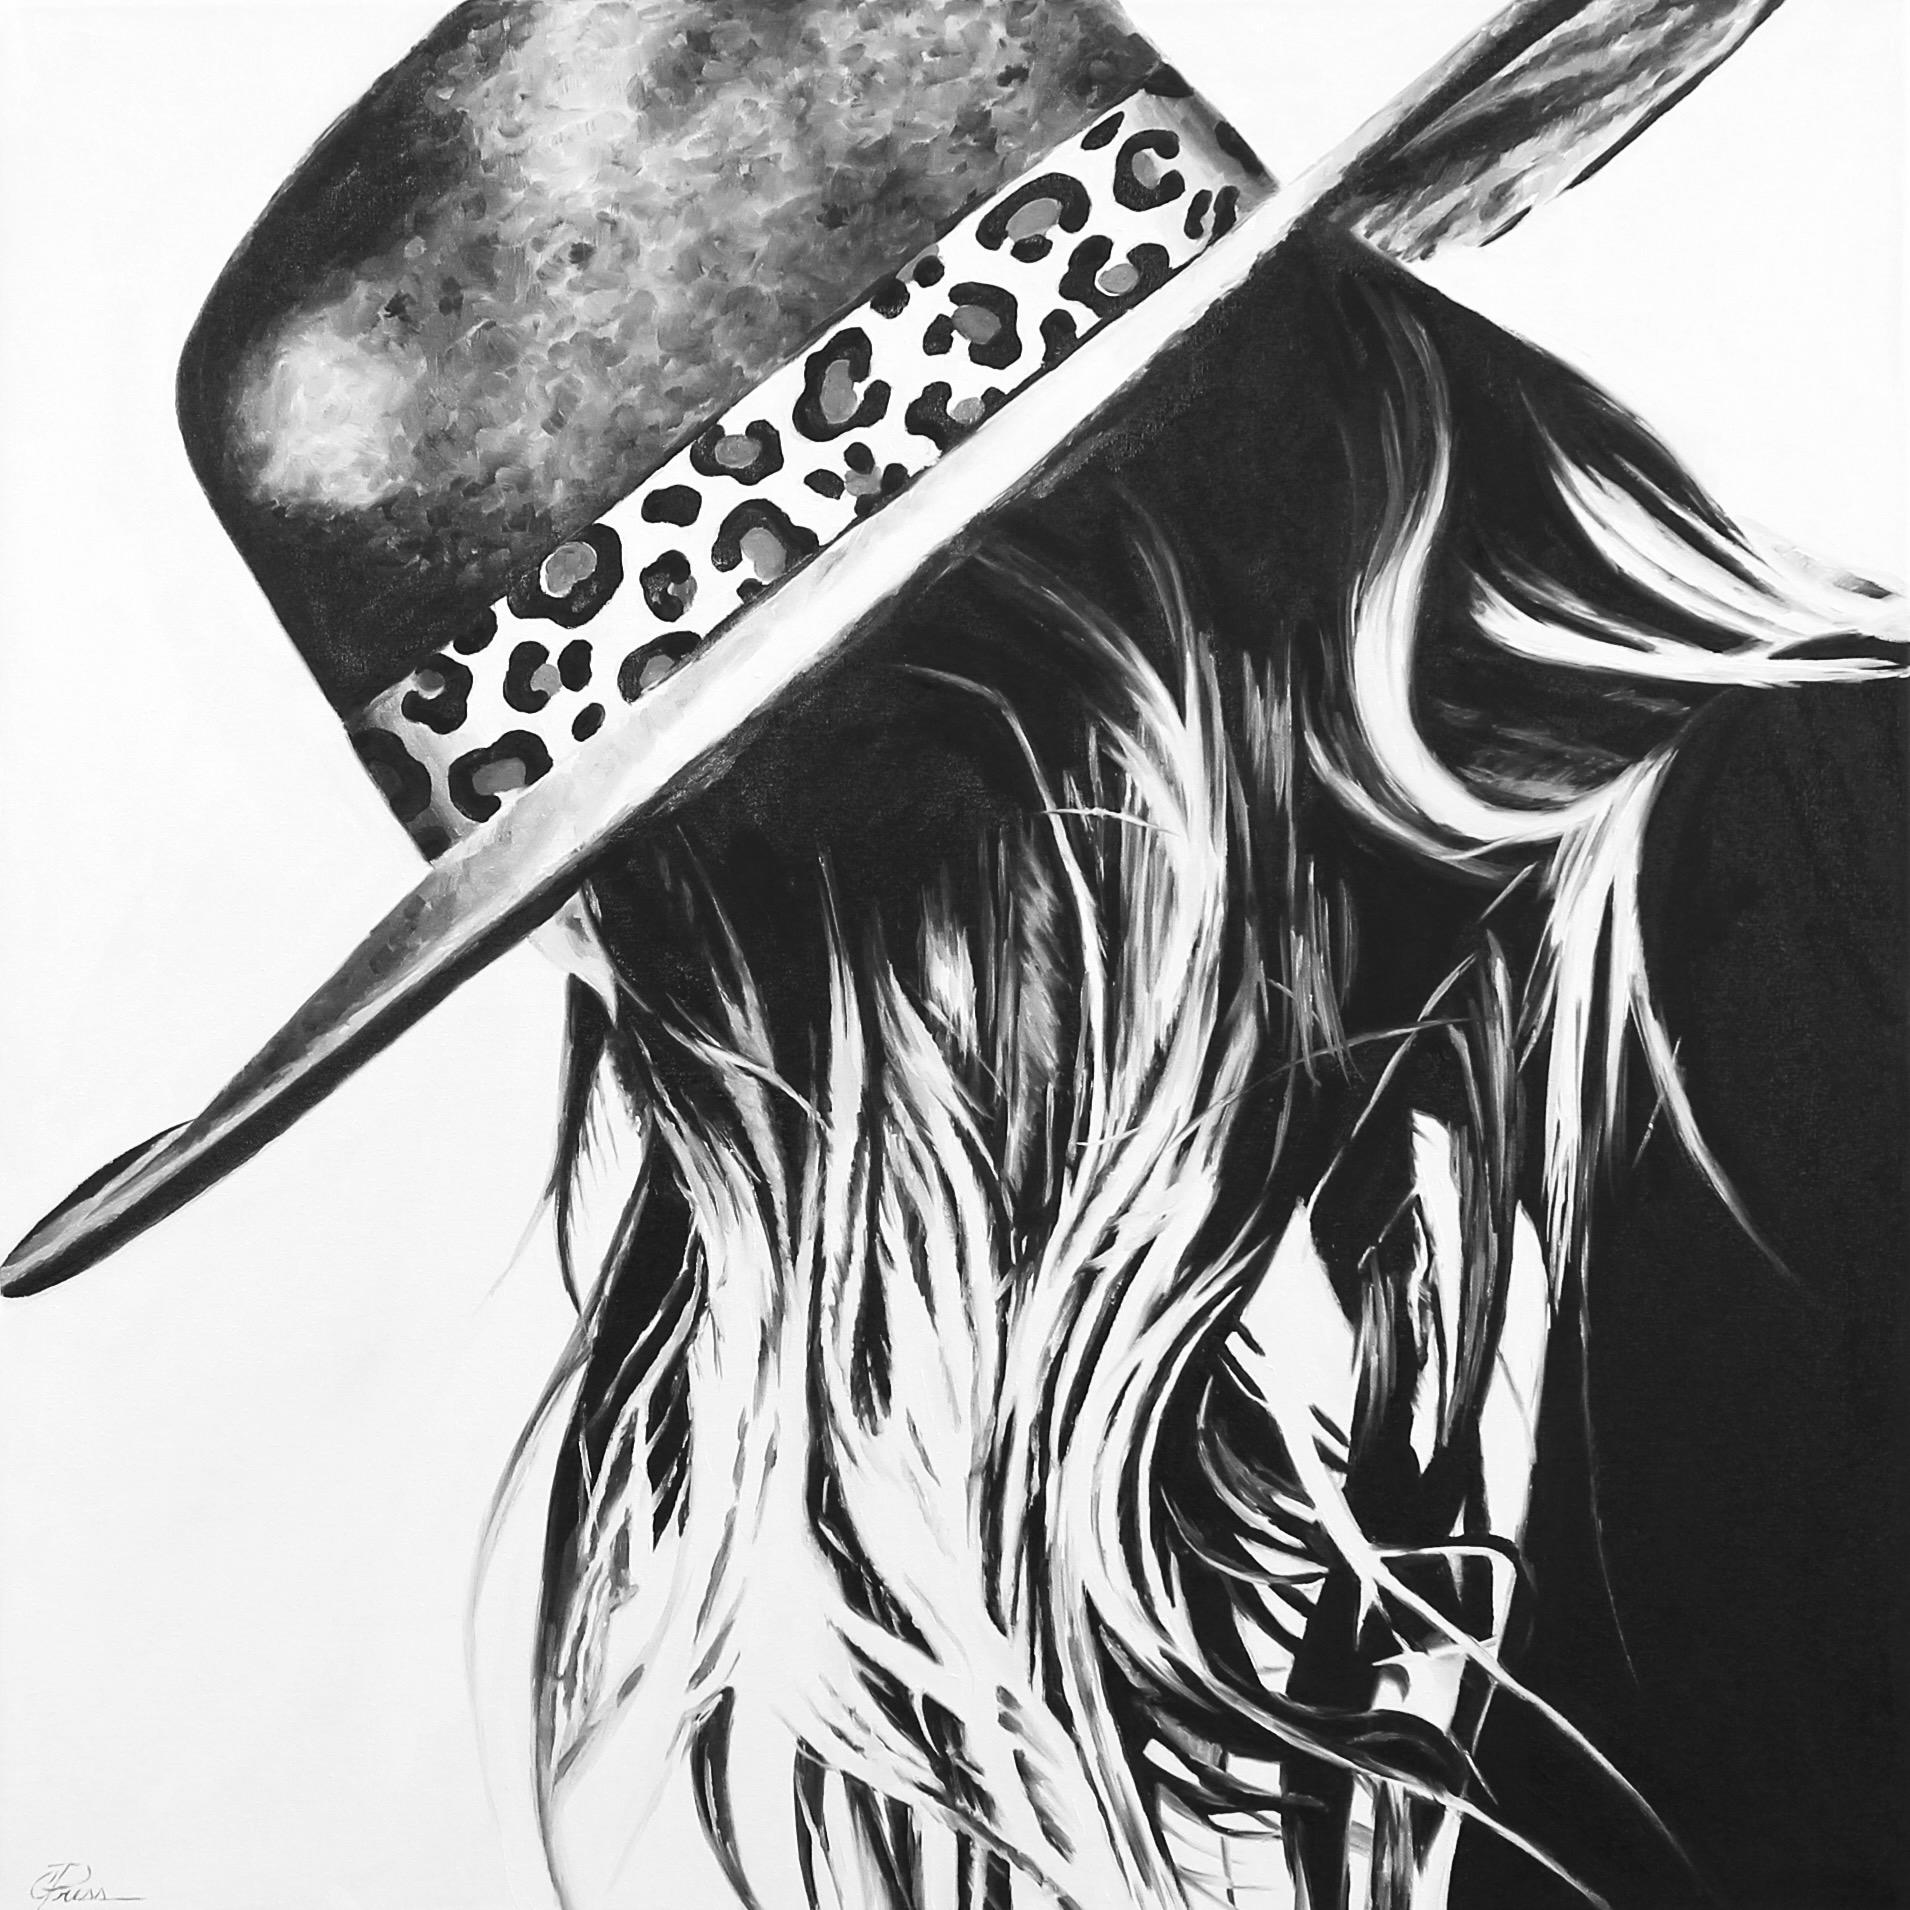 Cindy Press Figurative Painting - "My Wildest Dreams" oil painting of a woman wearing a fedora lookin down